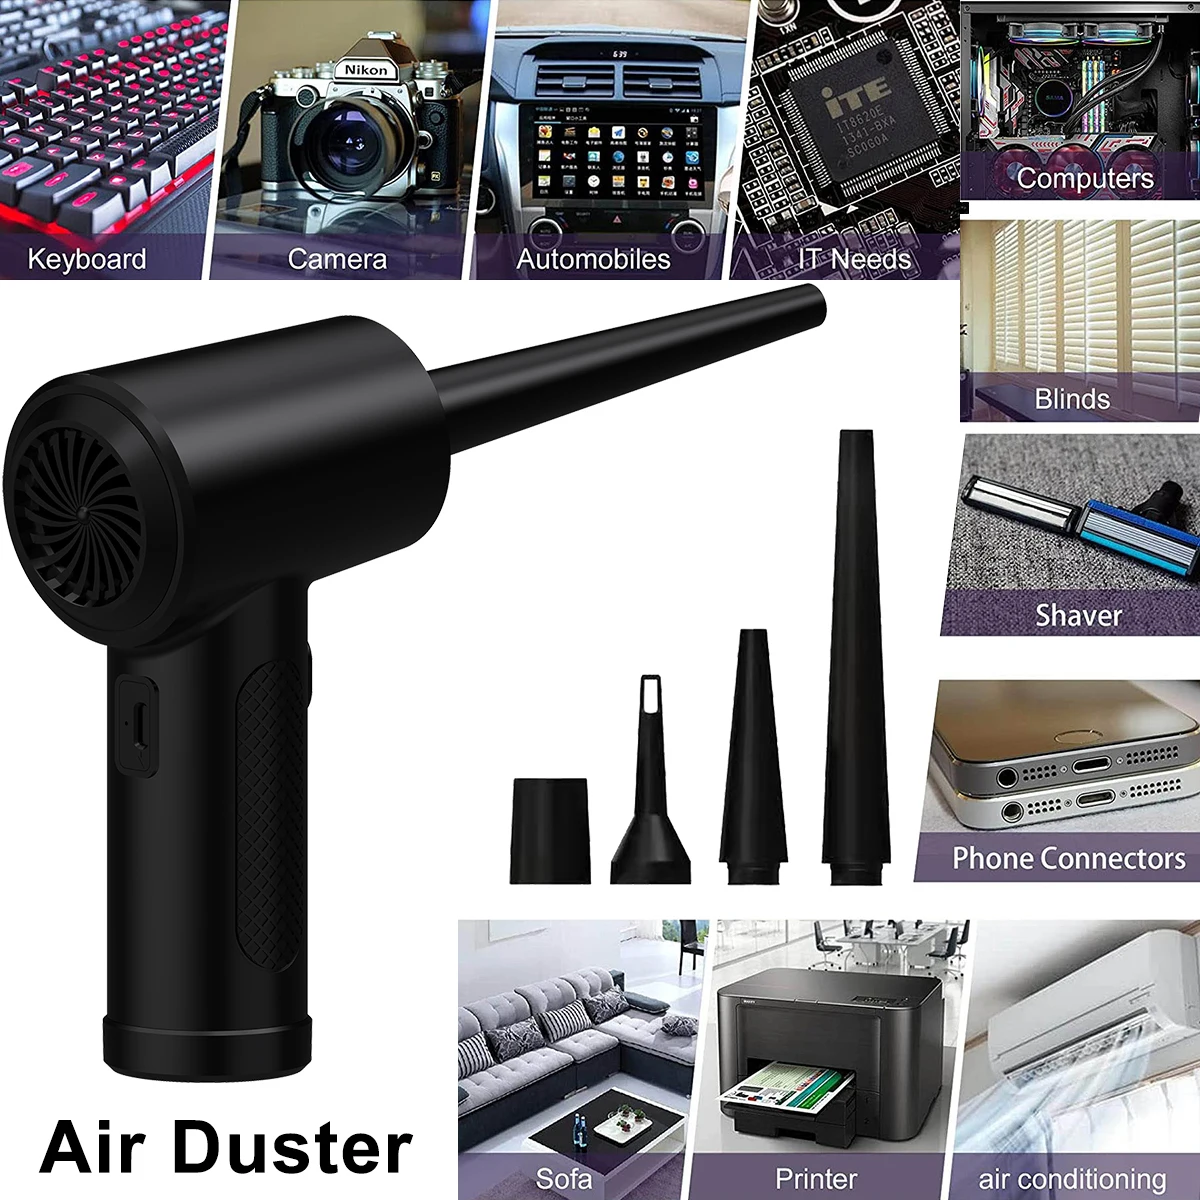 Air Duster 50000 RPM Dust Blowing Gun USB Cordless Compressed Air Blower For Cleaning Keyboard Computer Camera Dust images - 6